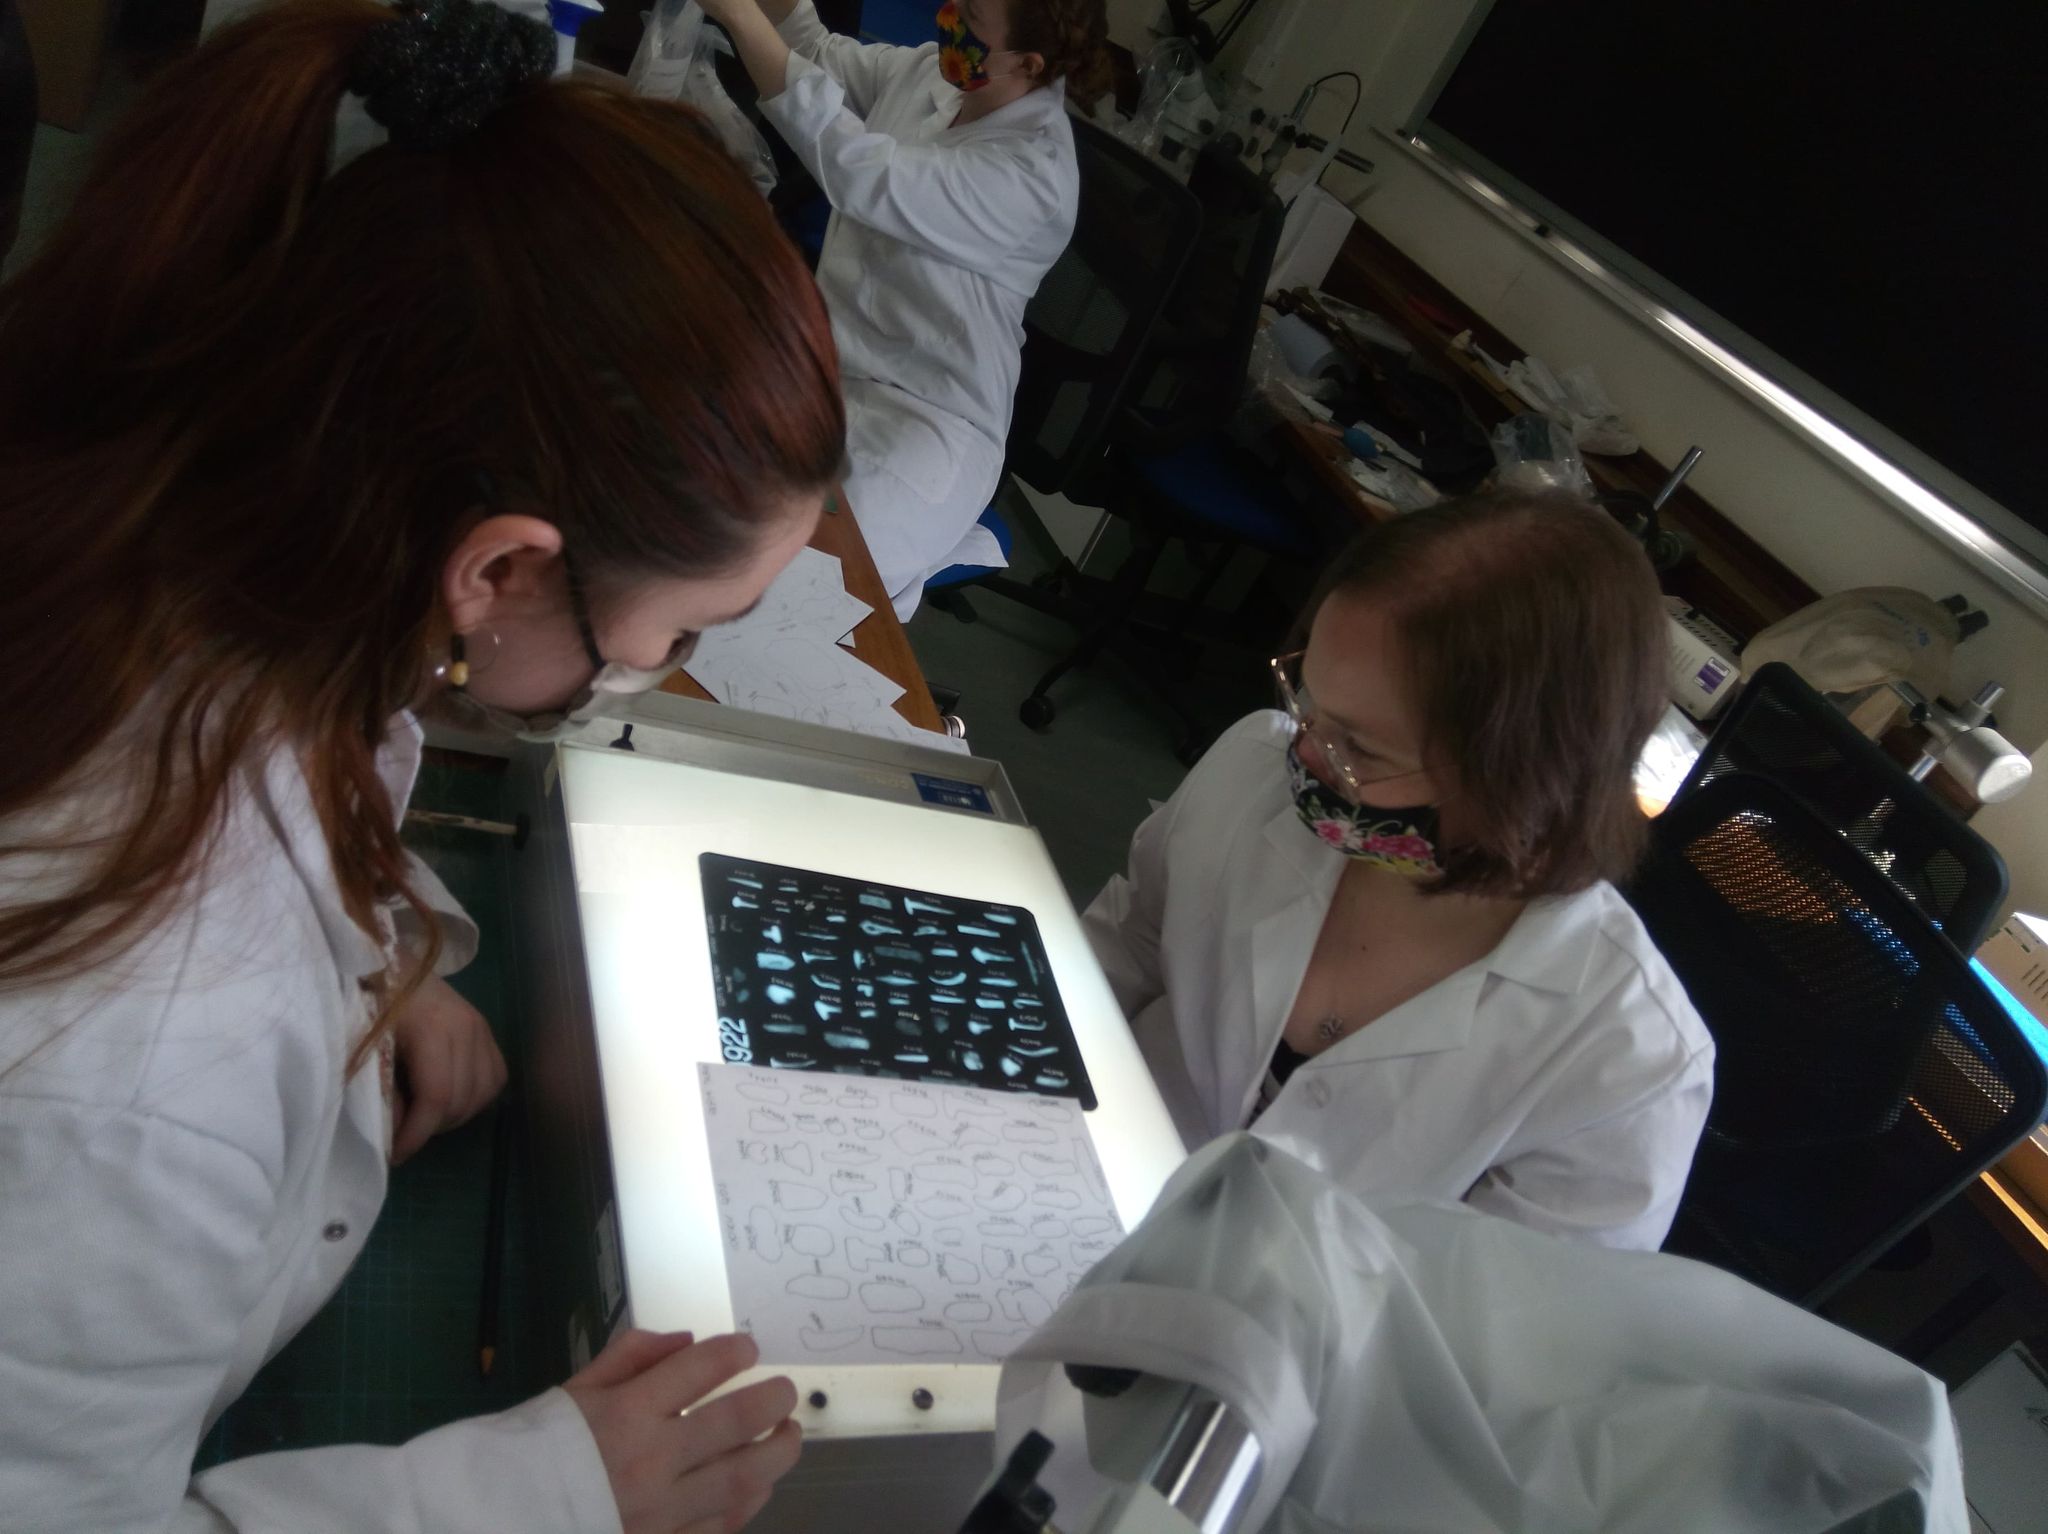 Three students wearing lab coats sat around a table. One student does a task out of frame; the two others sit at opposite sides of a lightbox viewing an X-ray.